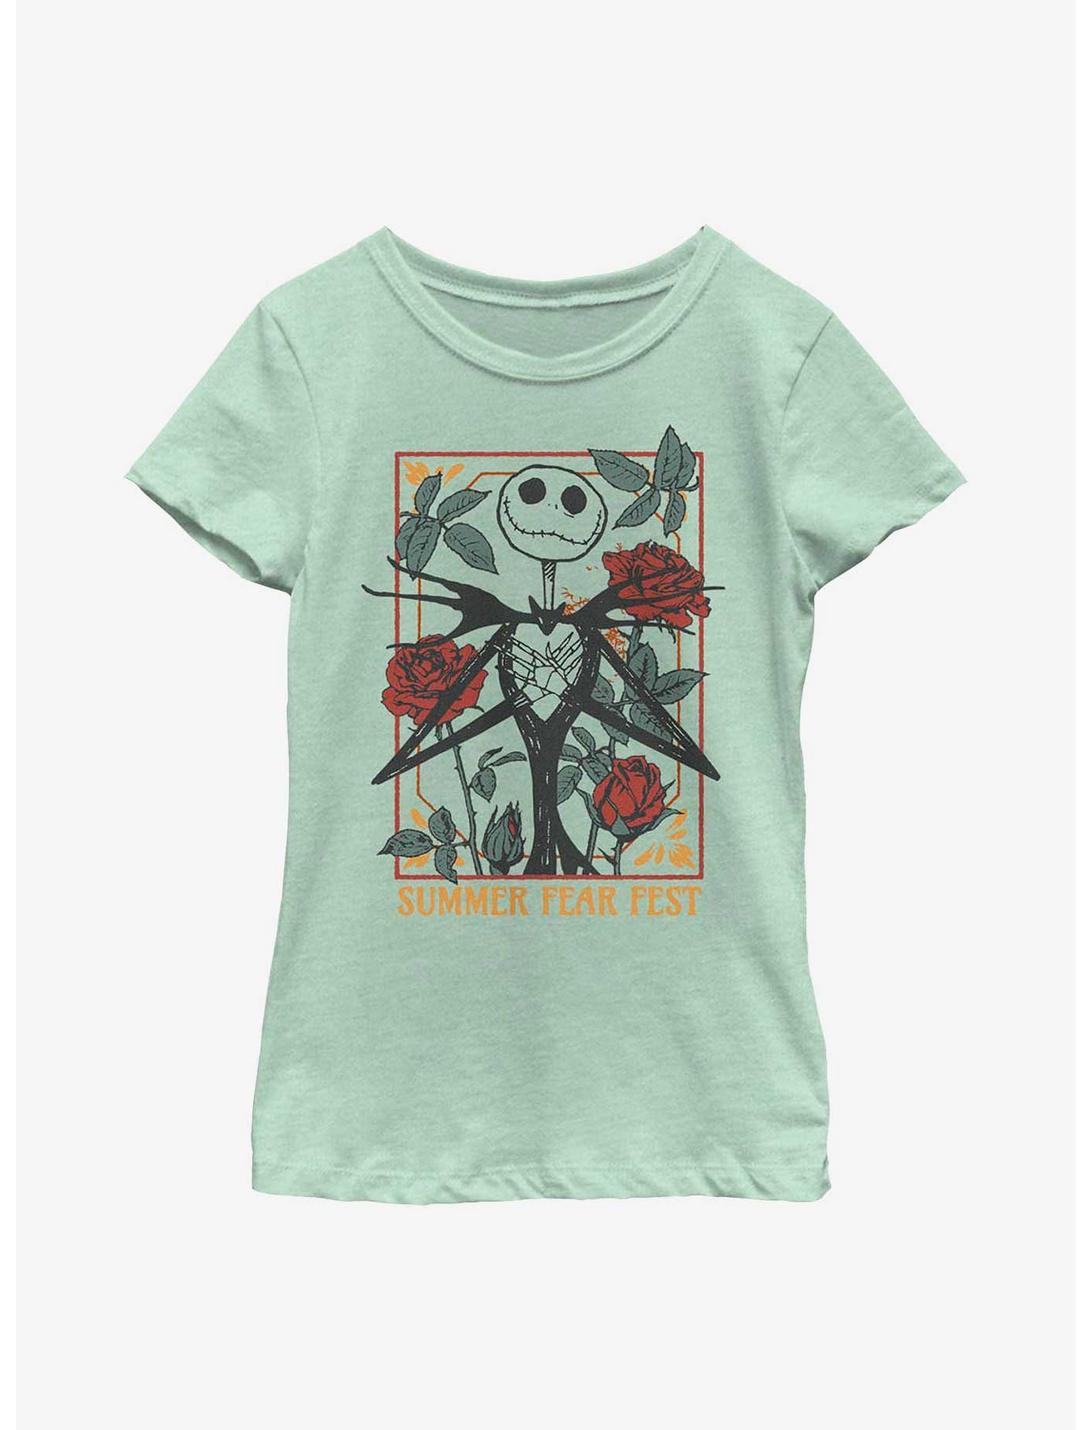 Disney The Nightmare Before Christmas Jack Summer Fear Fest Youth Girls T-Shirt, MINT, hi-res